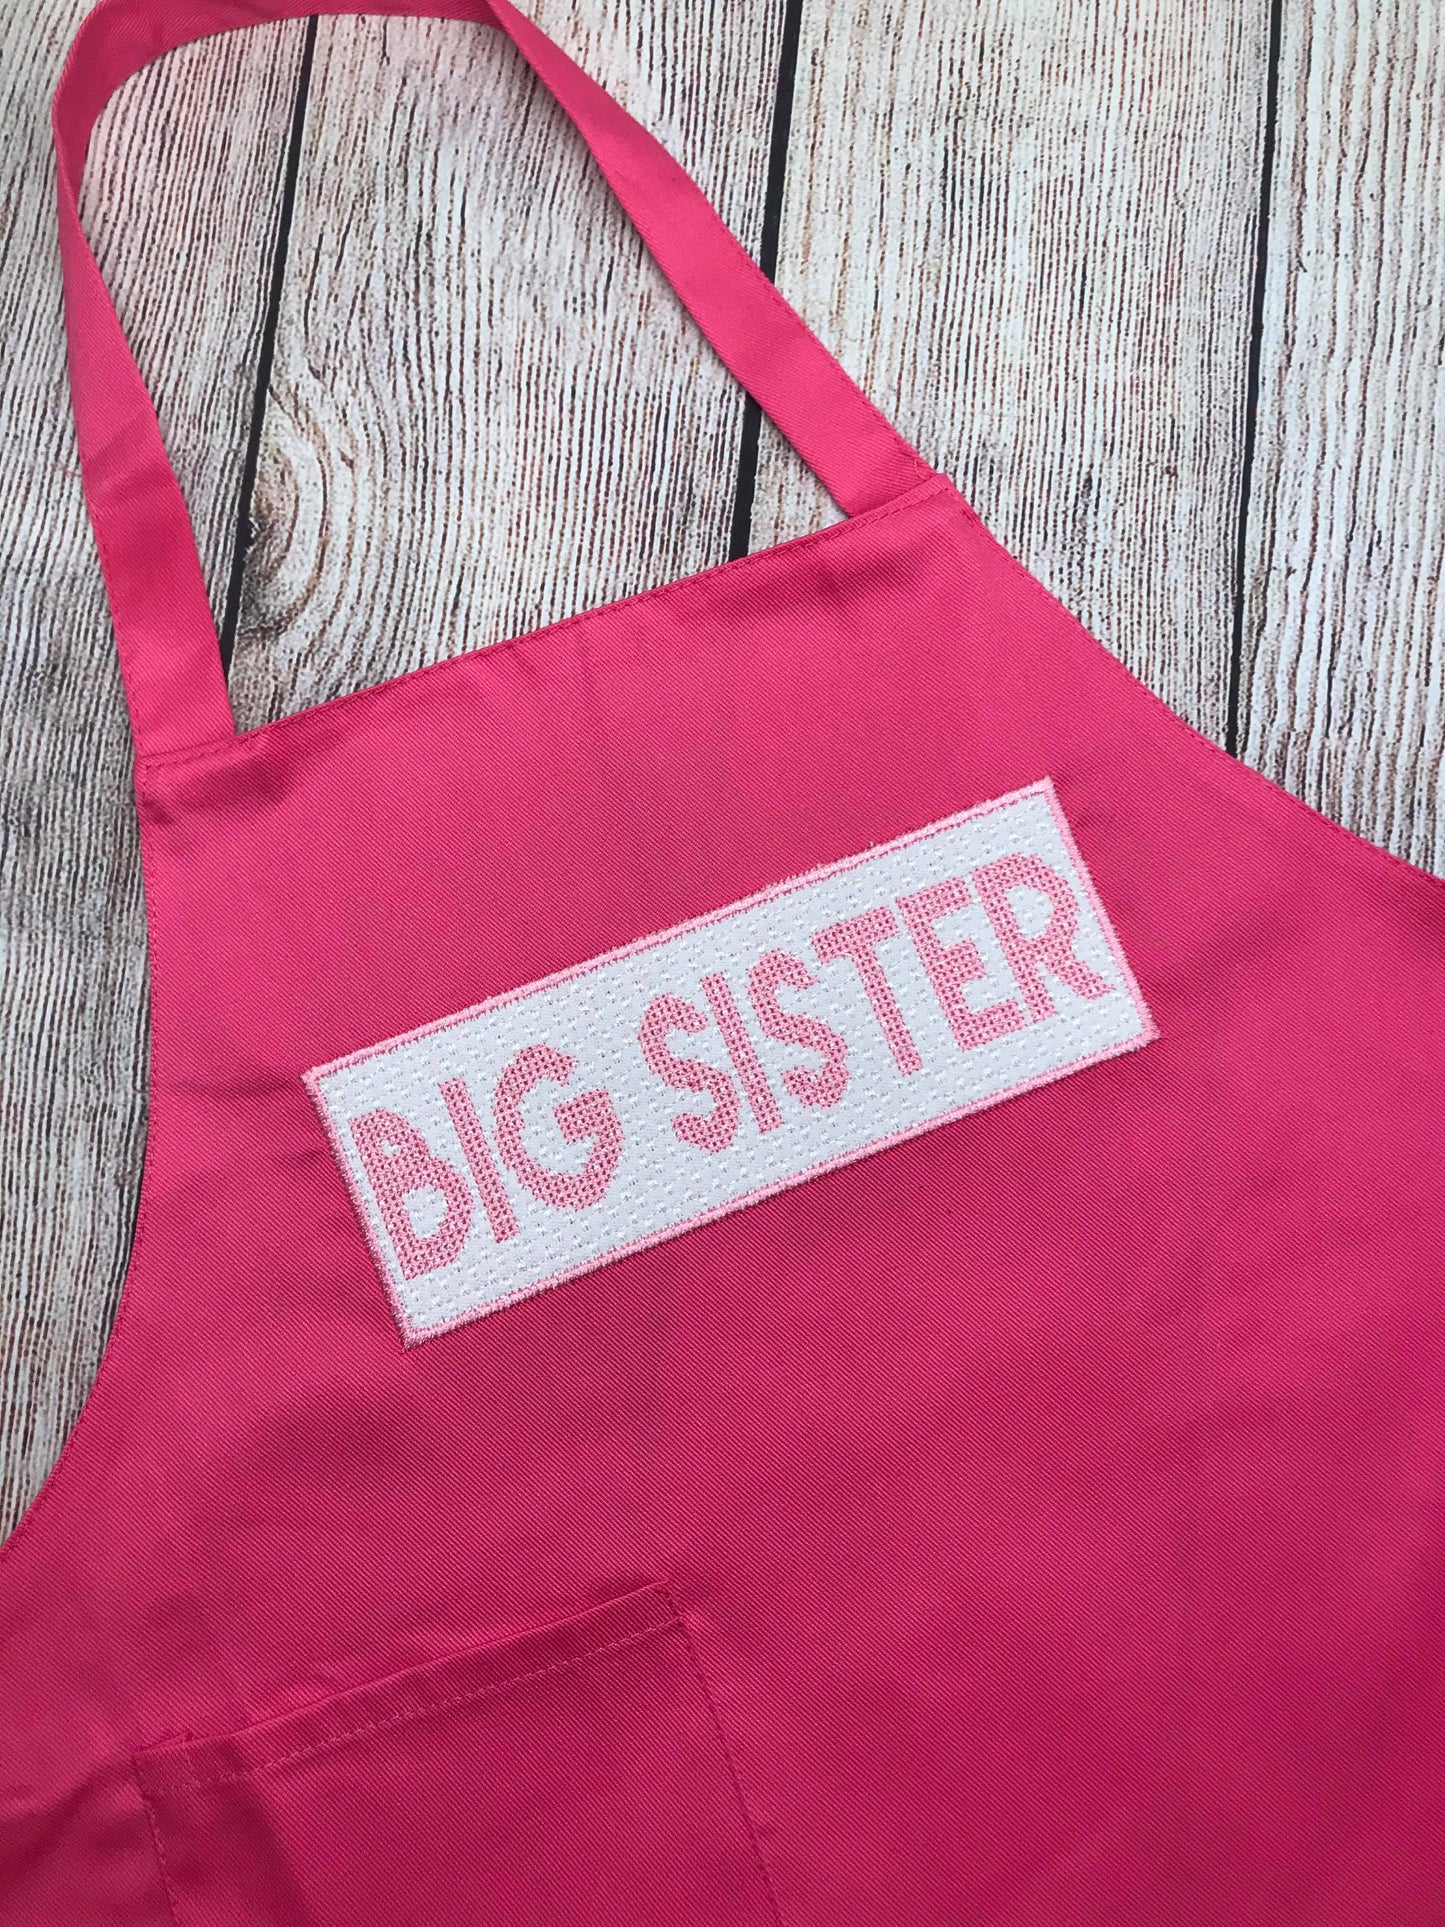 Girls Big Sister Apron , Girls  Apron, Kids Baking Apron, Personalized Gifts for Kids, Aprons for Kids, Sibling Apron, Faux Smock Apron